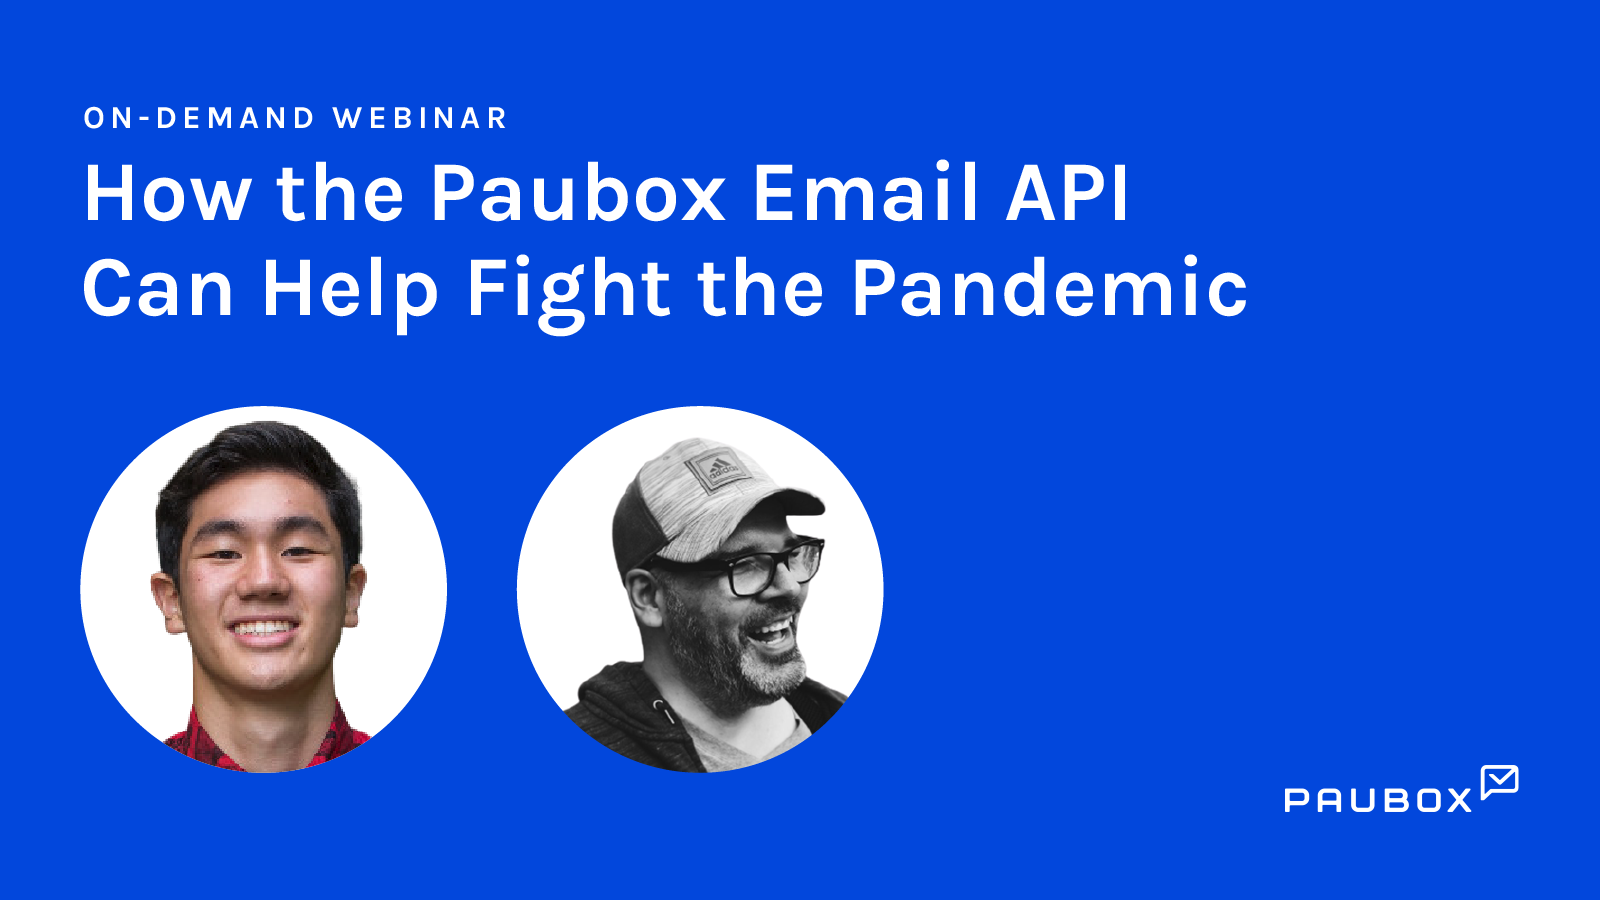 How the Paubox Email API can help fight the pandemic